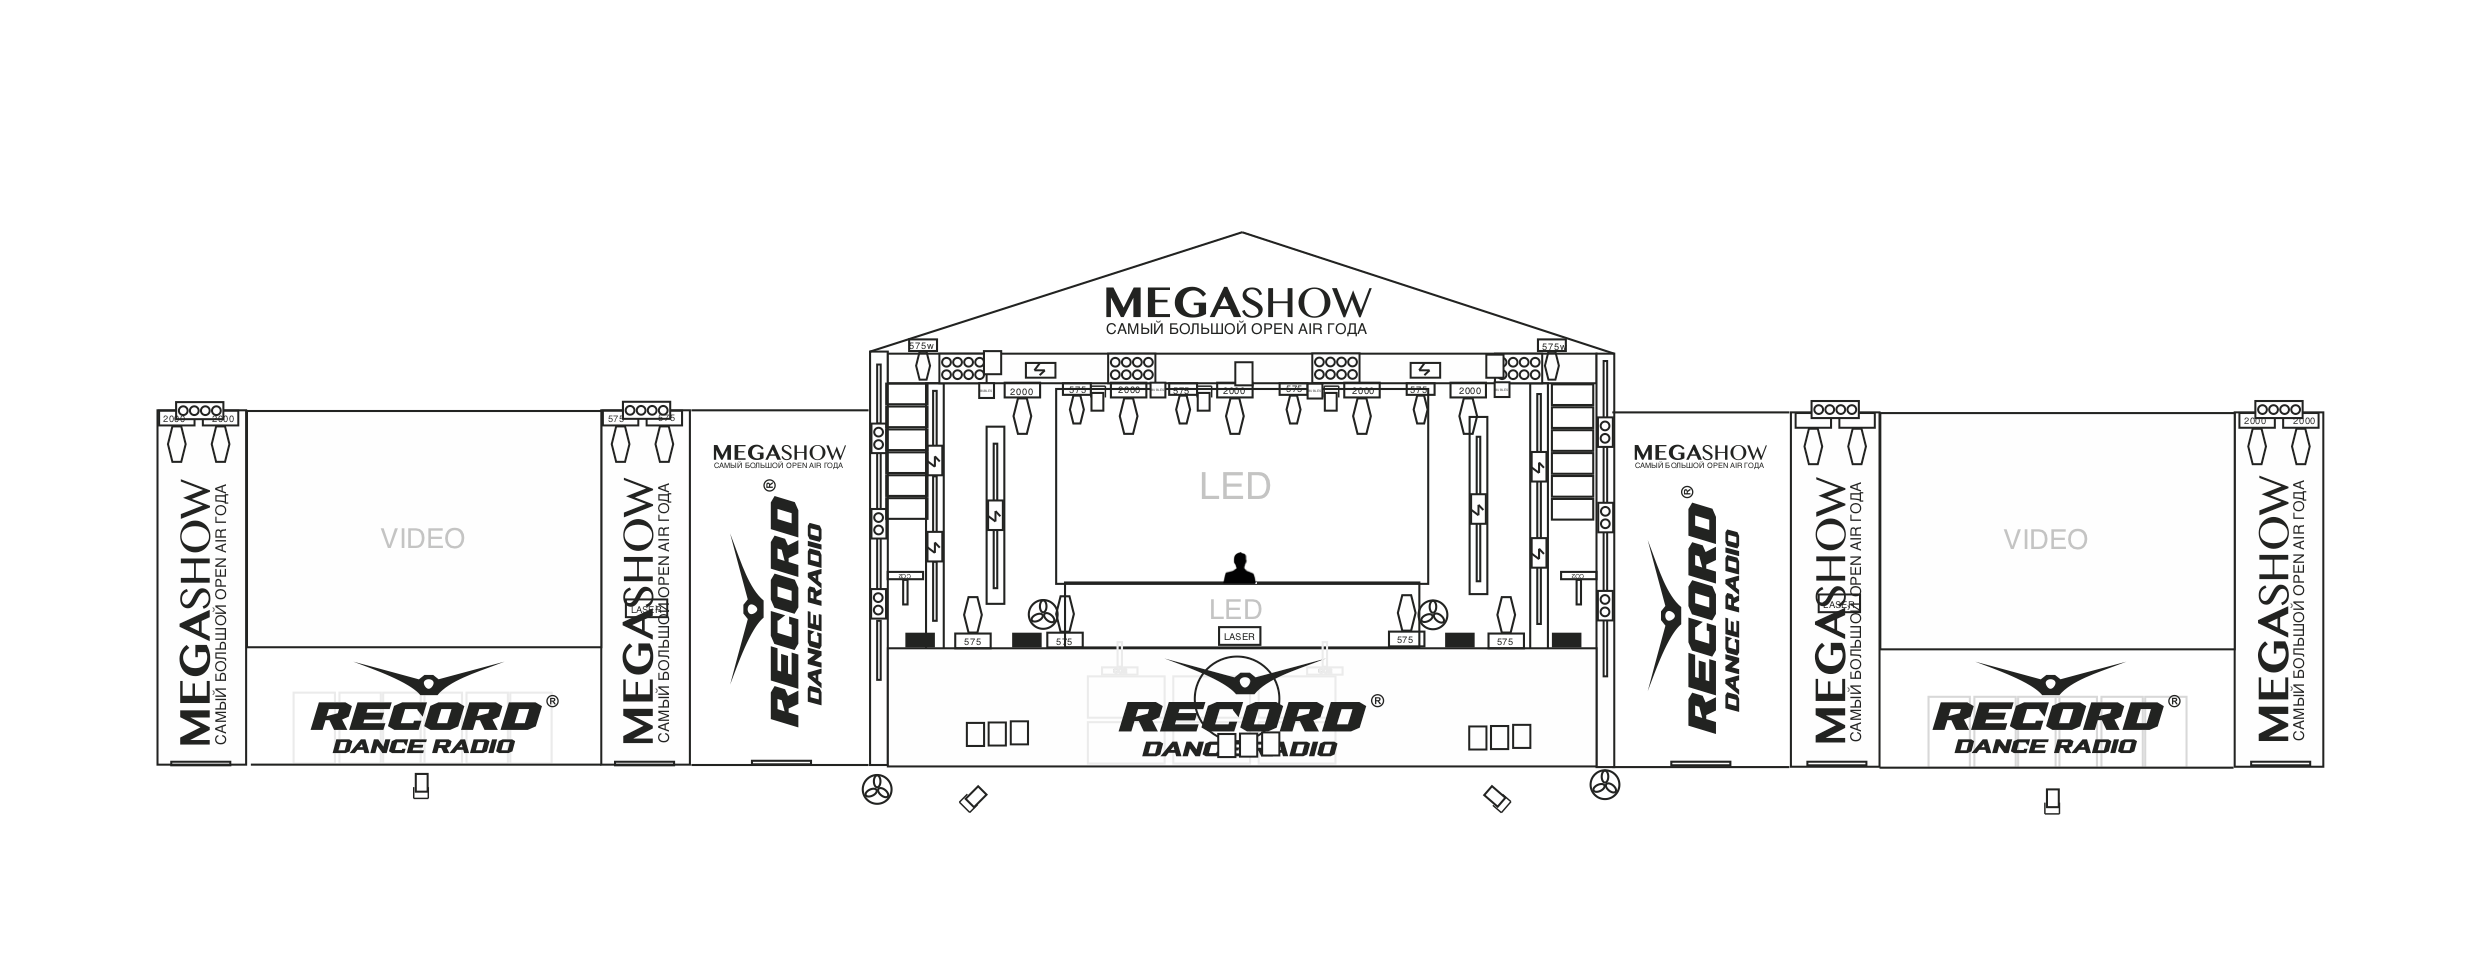 Megashow main stage the most expensive and extensive event in the history of Omsk 25 august 2012 Oleg Borisov Omsk Moscow Russia